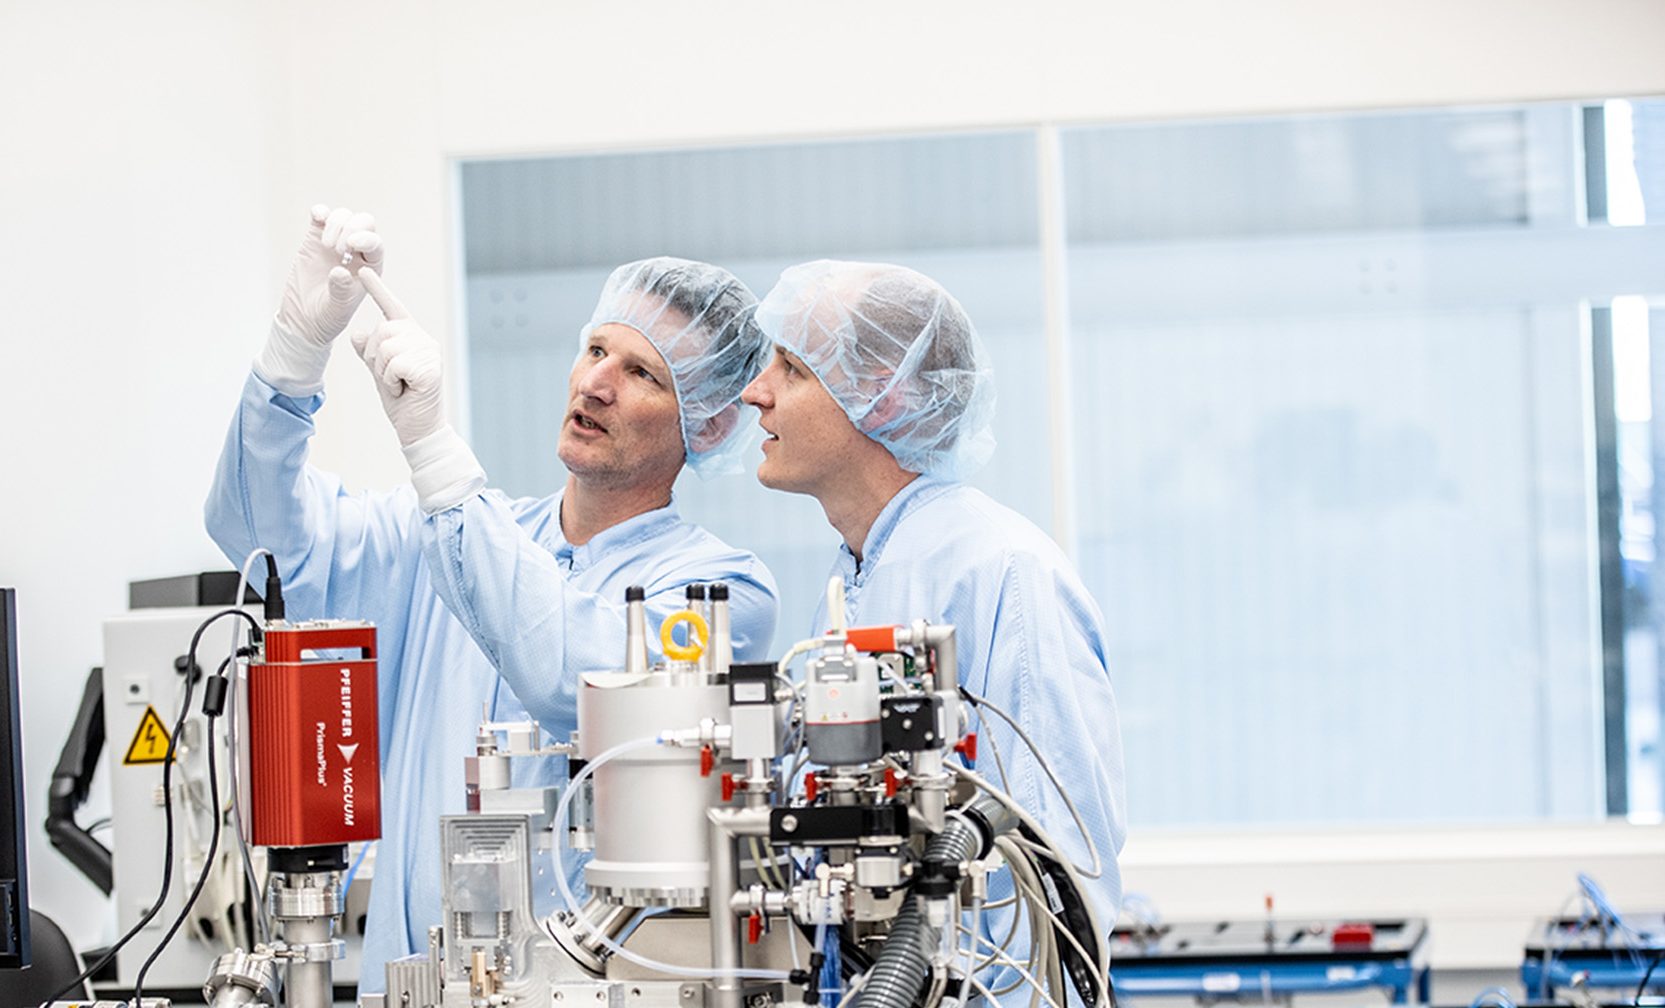 Analytical cleanroom assembly focus